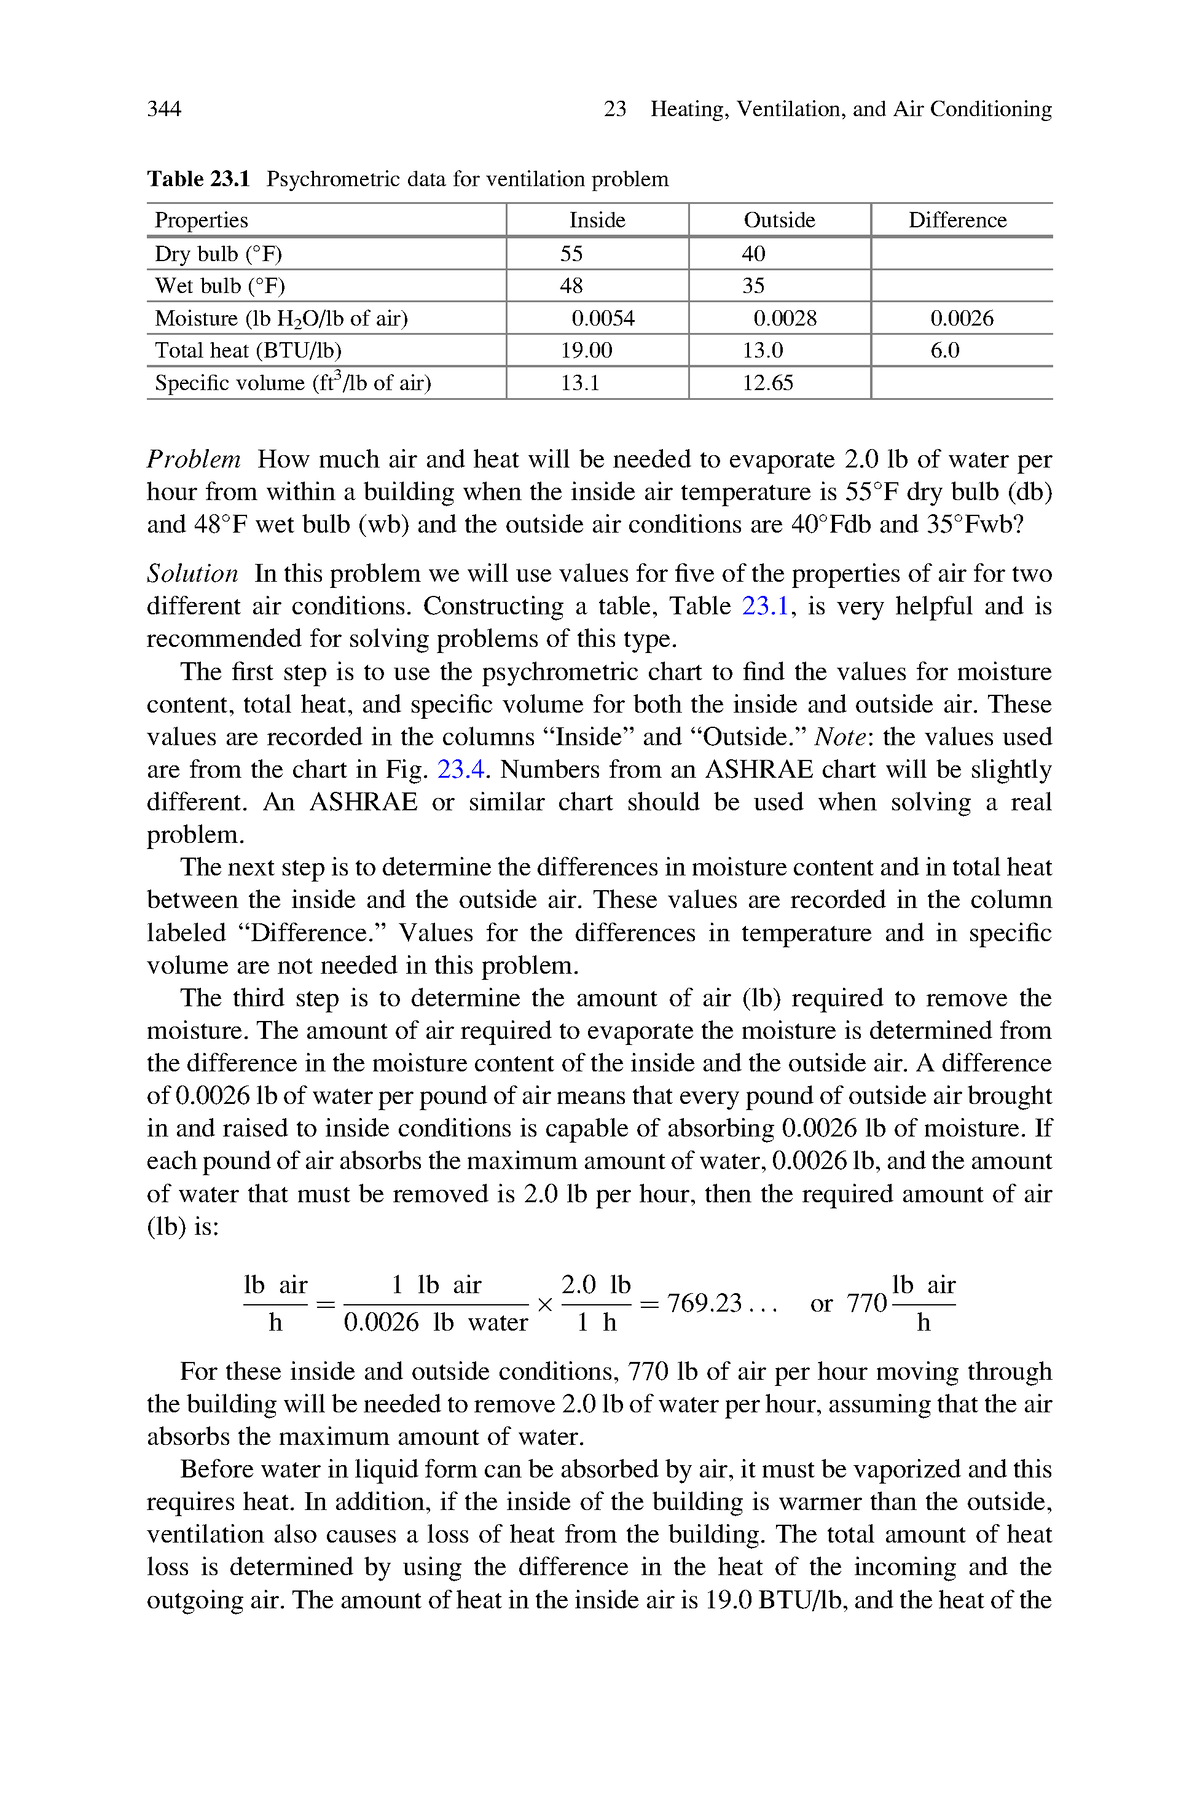 Agricultural Engineering Technology-173 - Table 23 Psychrometric data ...